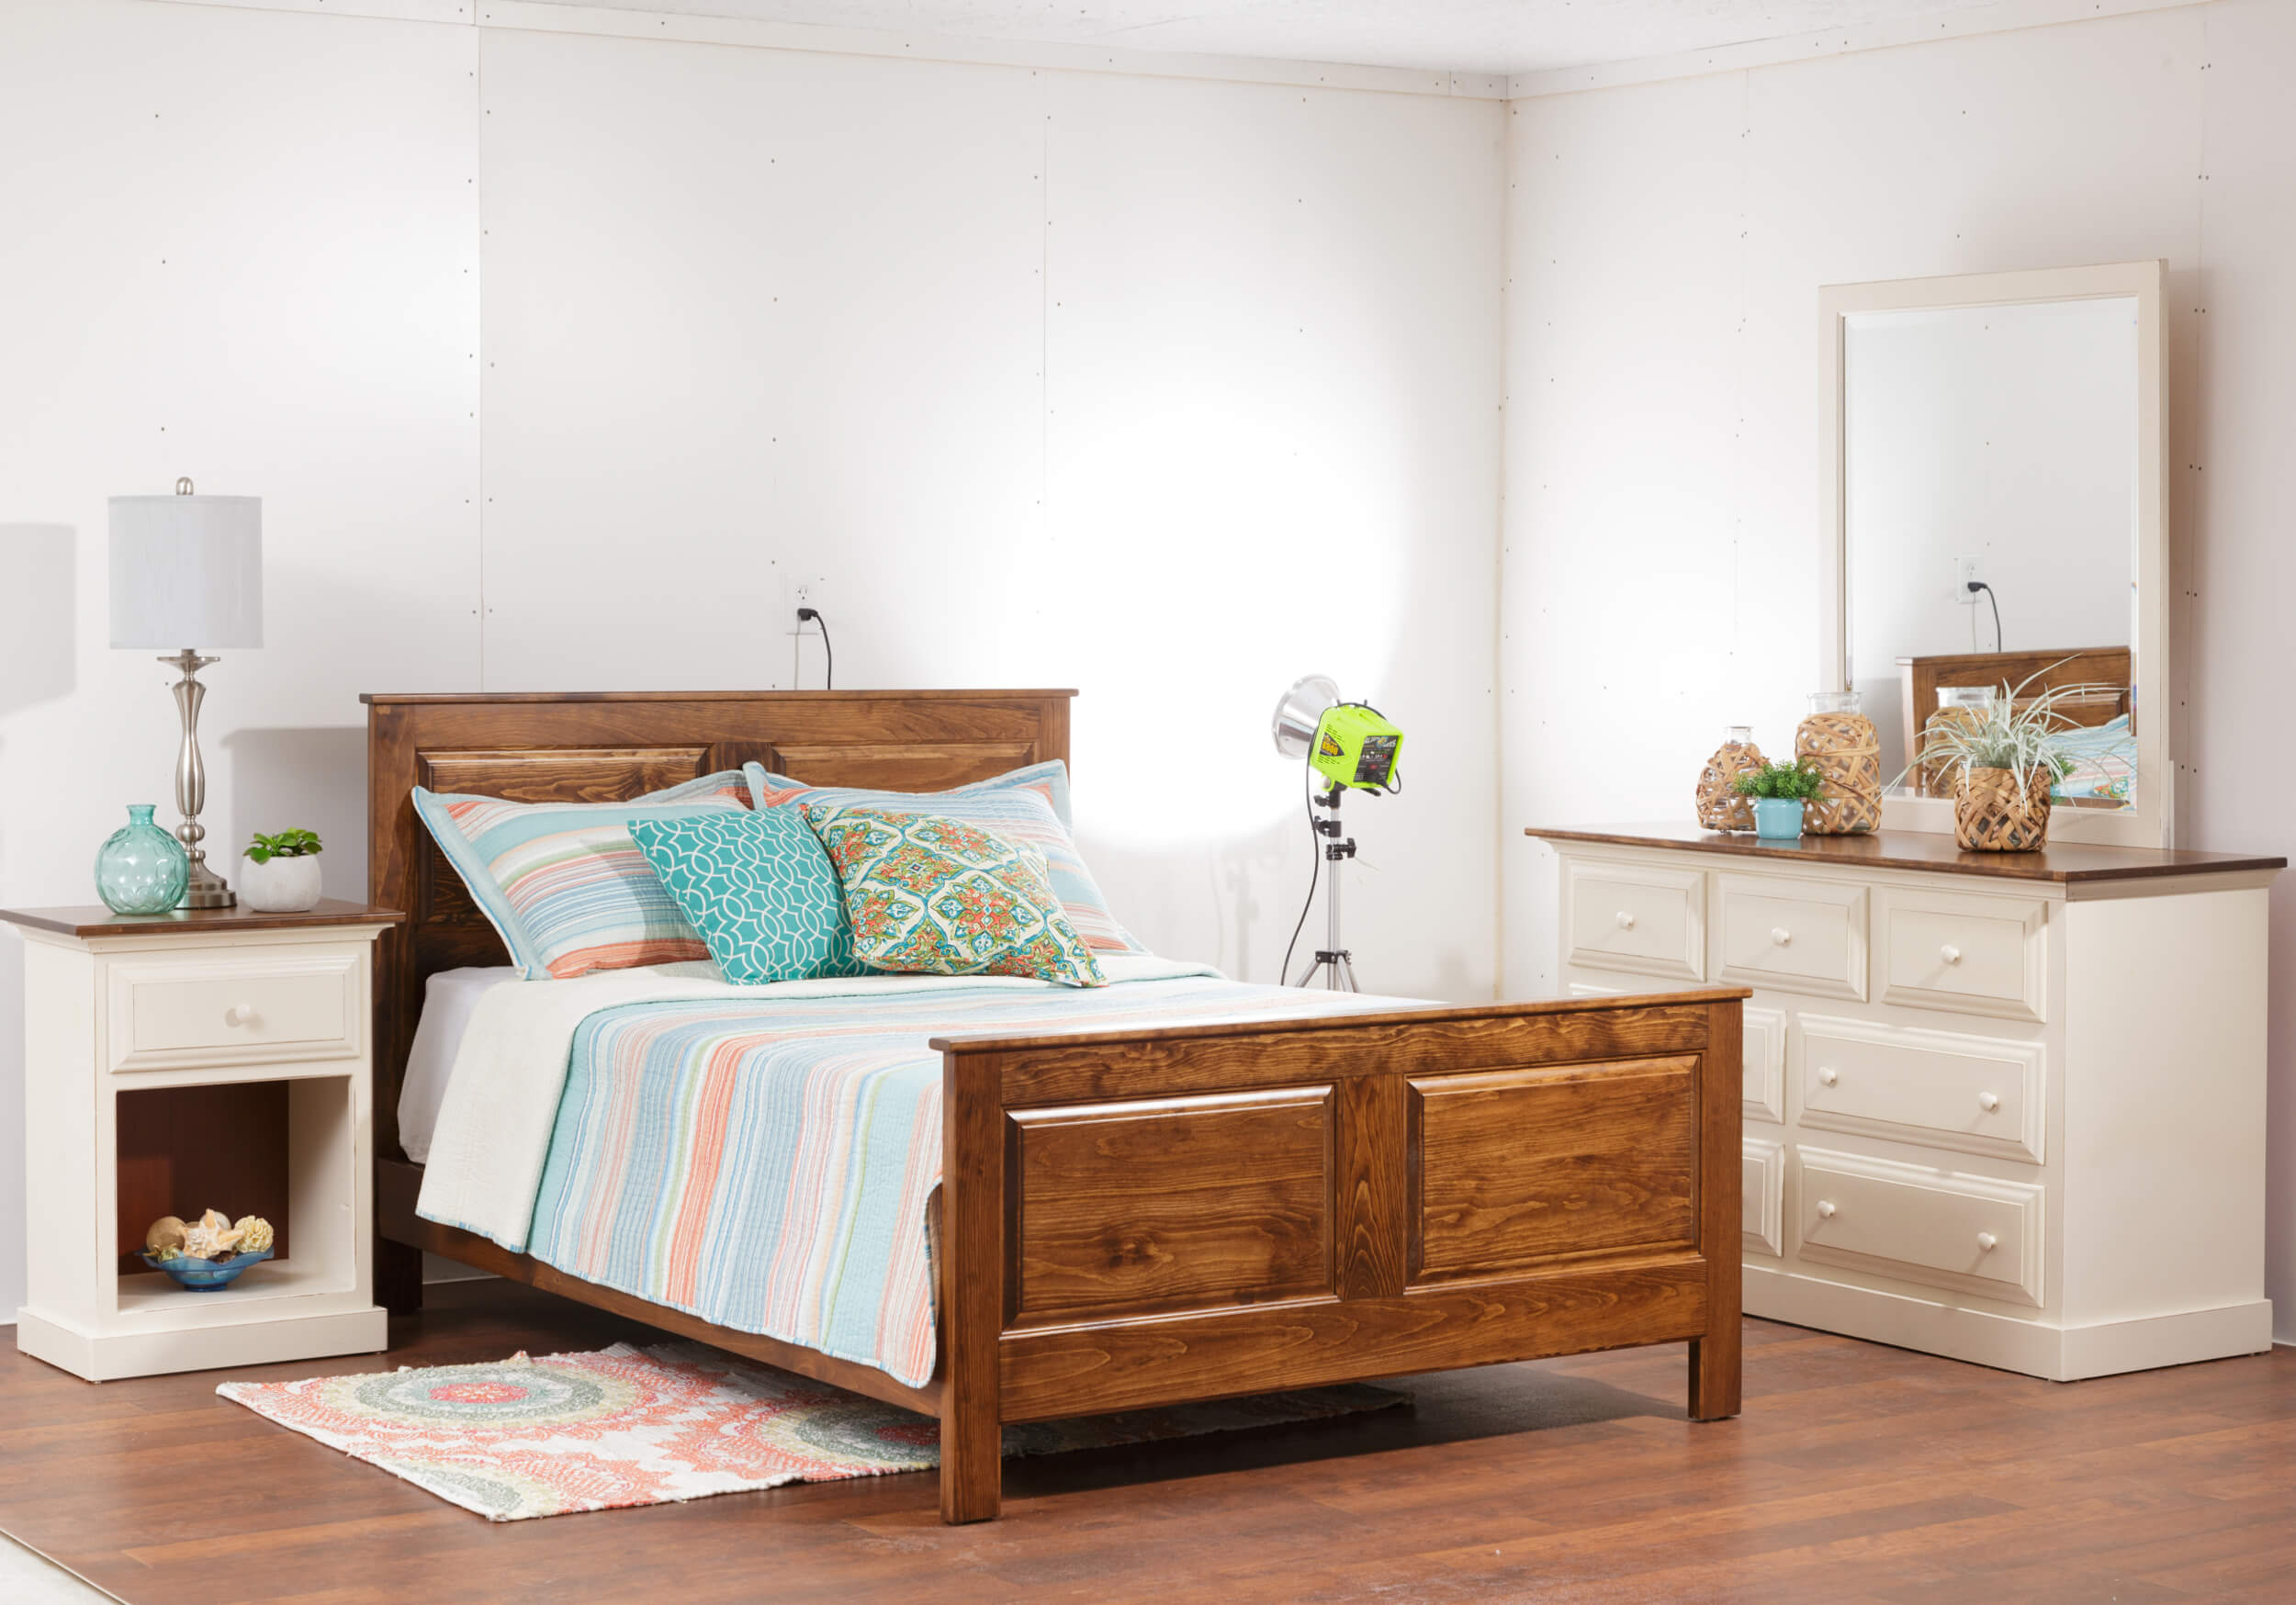 Simply Ours Feature - Bedroom